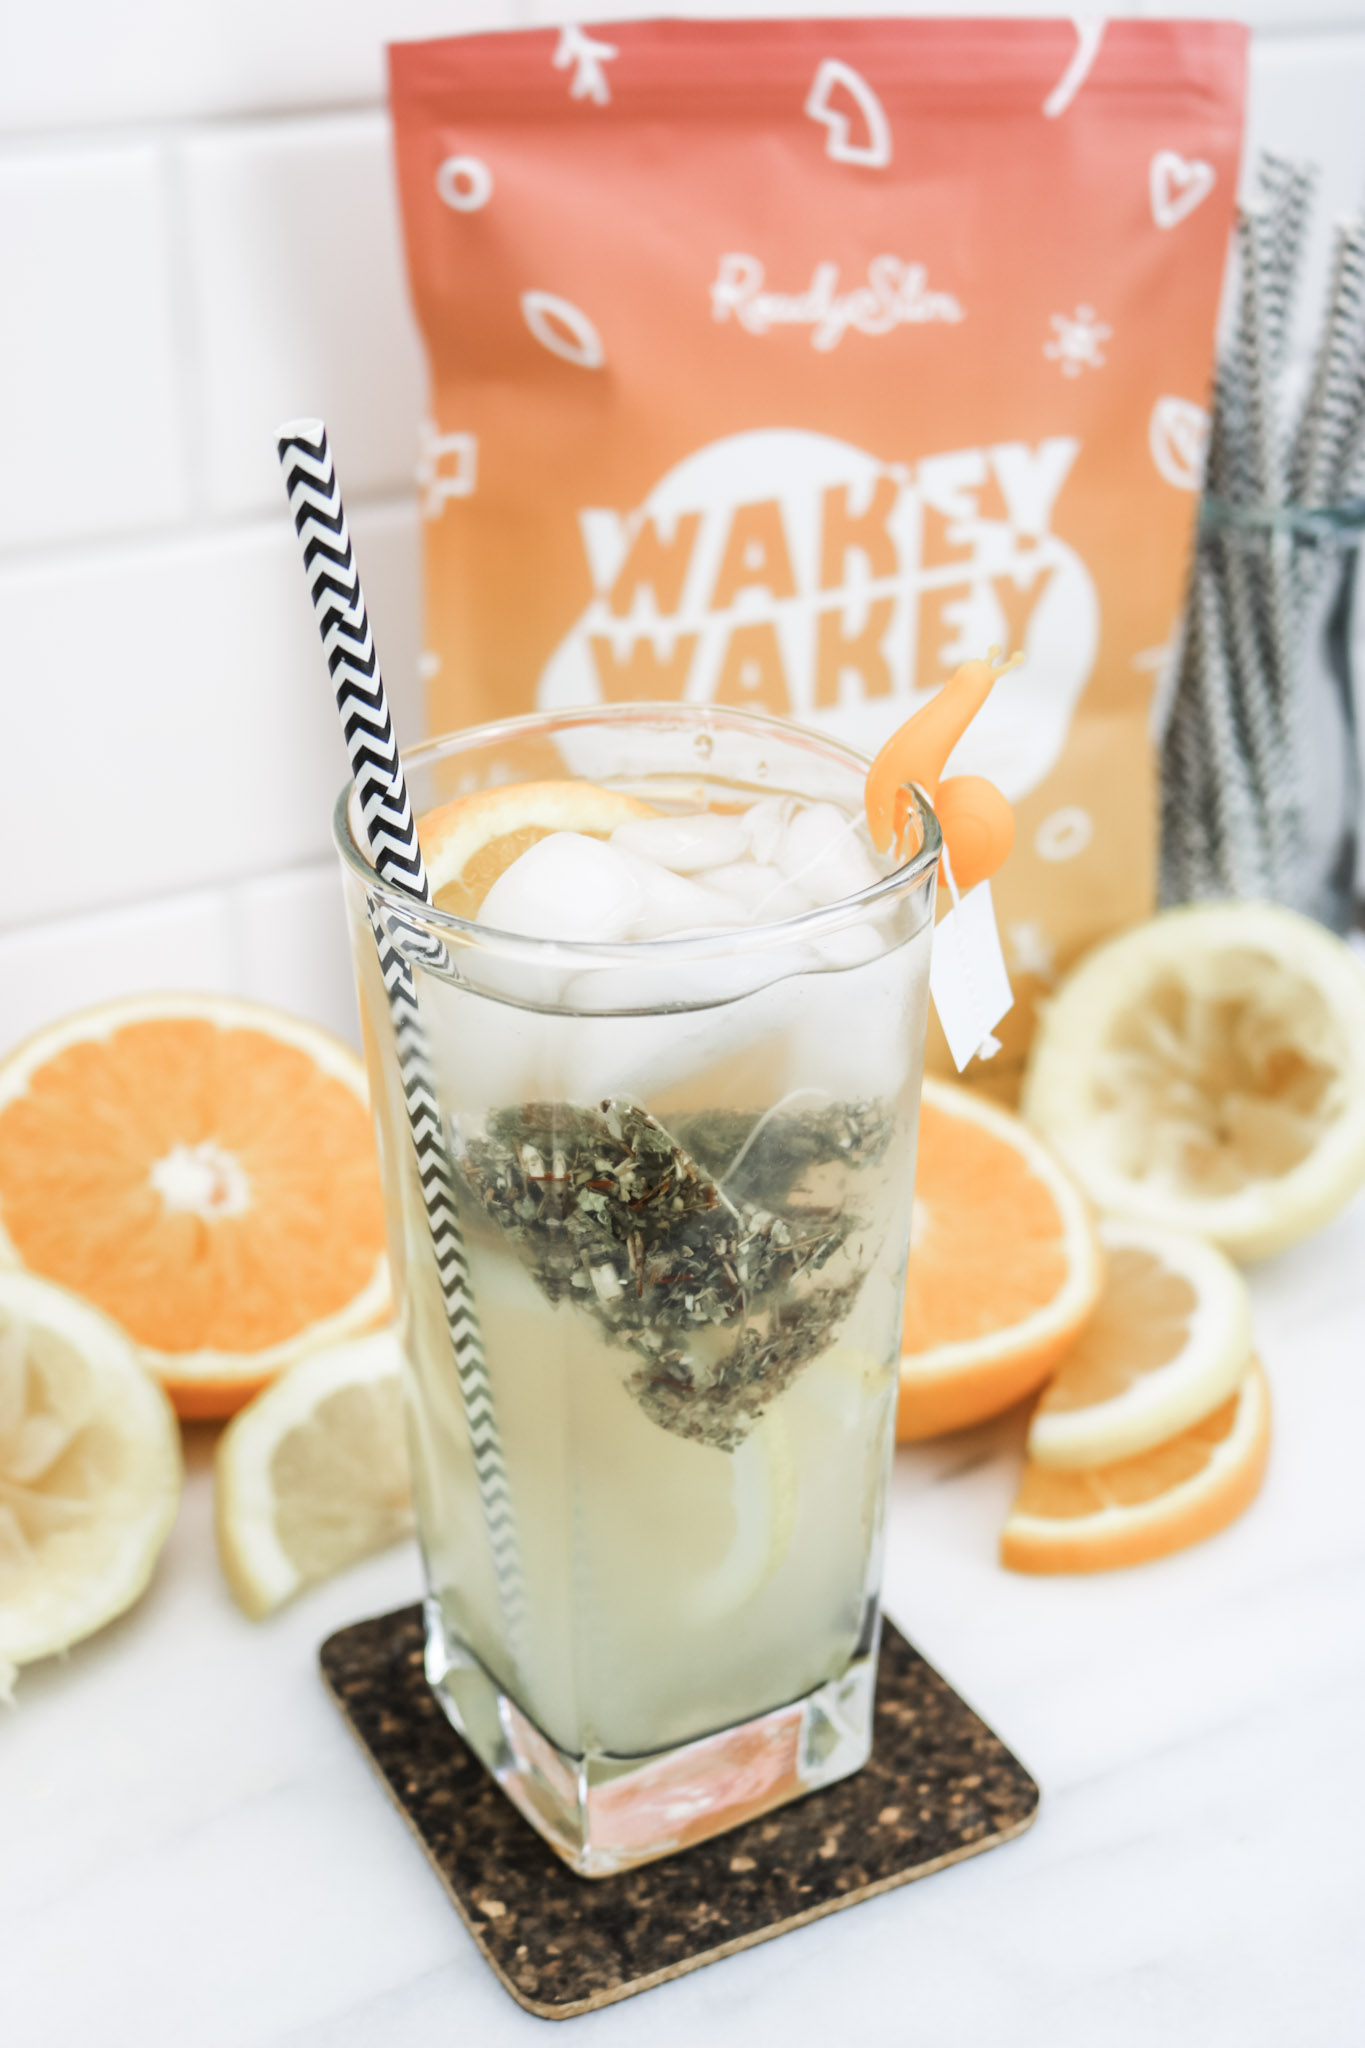 A tall glass of Wakey Wakey tea is shown with ingredients used to make it surrounding it. A bag of Wakey Wakey is behind it. 